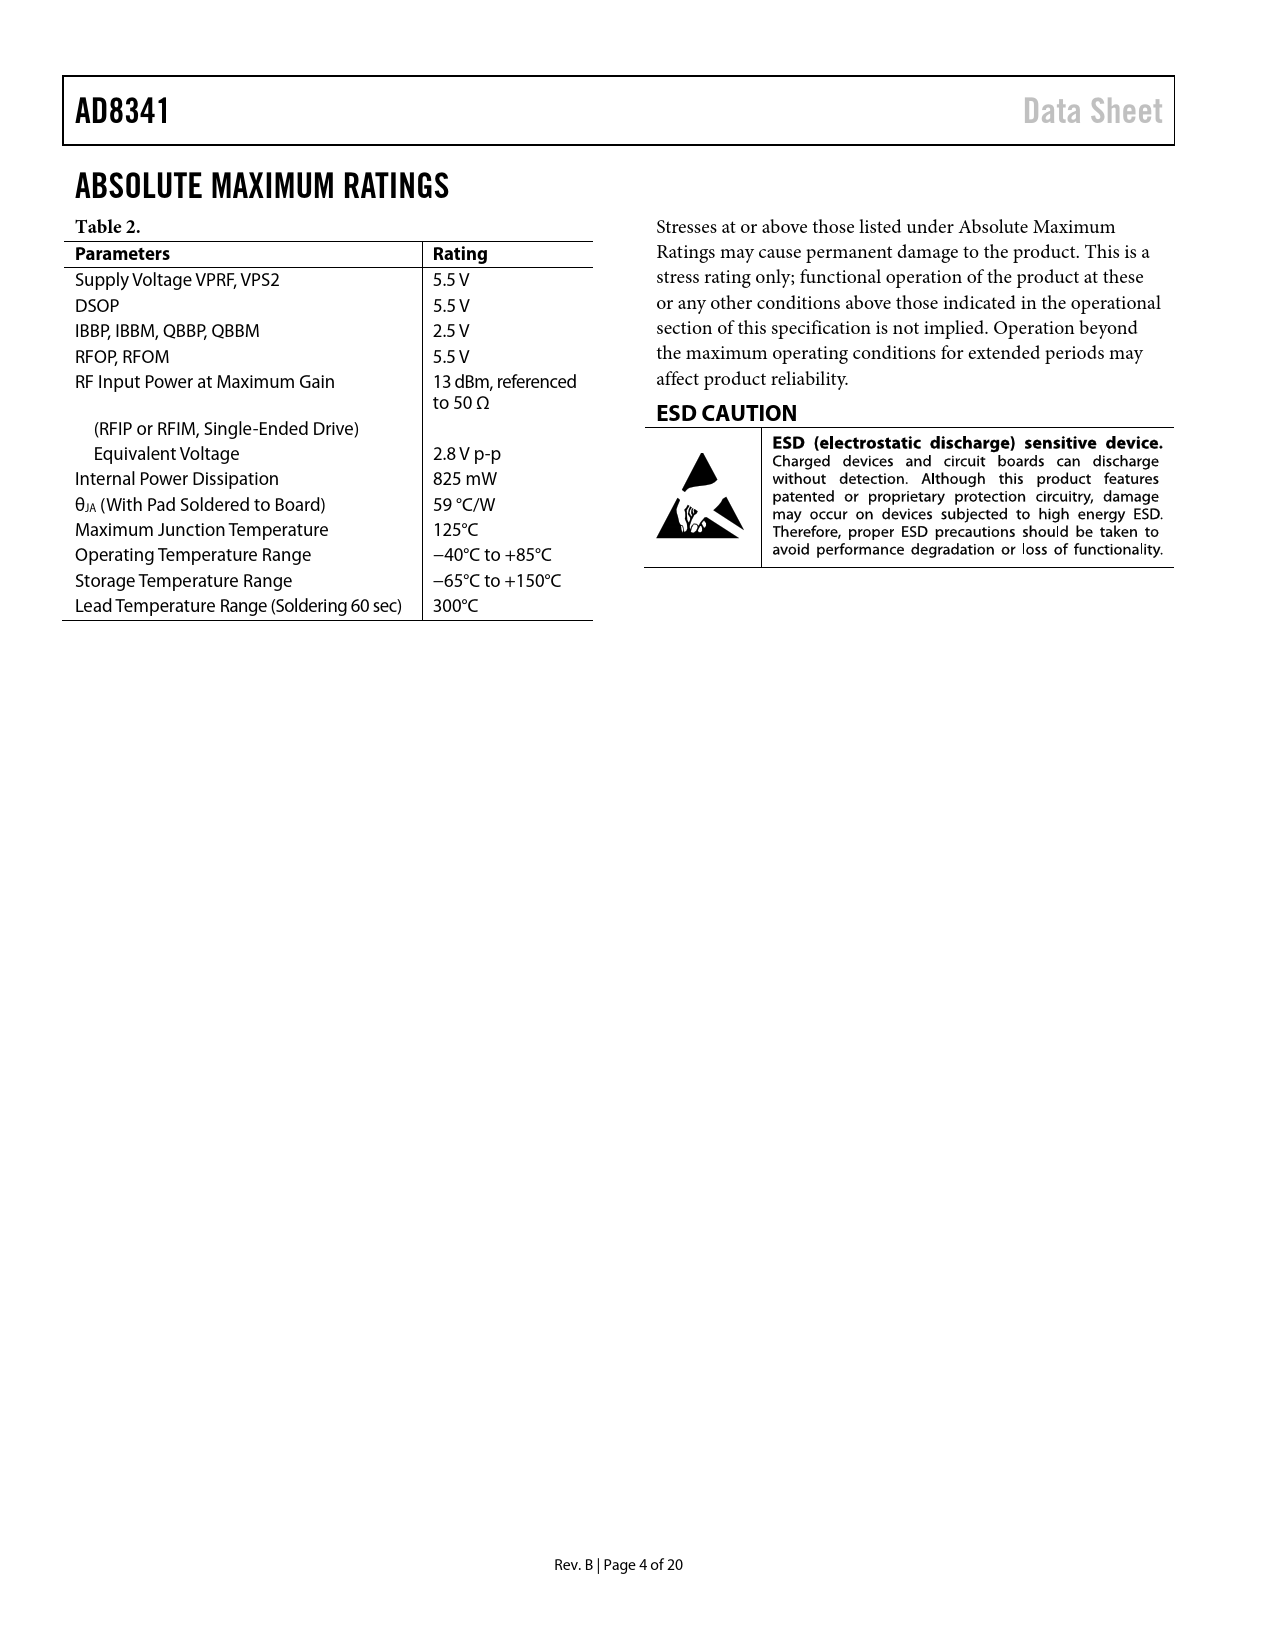 AD8341 Data Sheet ABSOLUTE MAXIMUM RATINGS Table 2 Parameters Rating ESD CAUTION